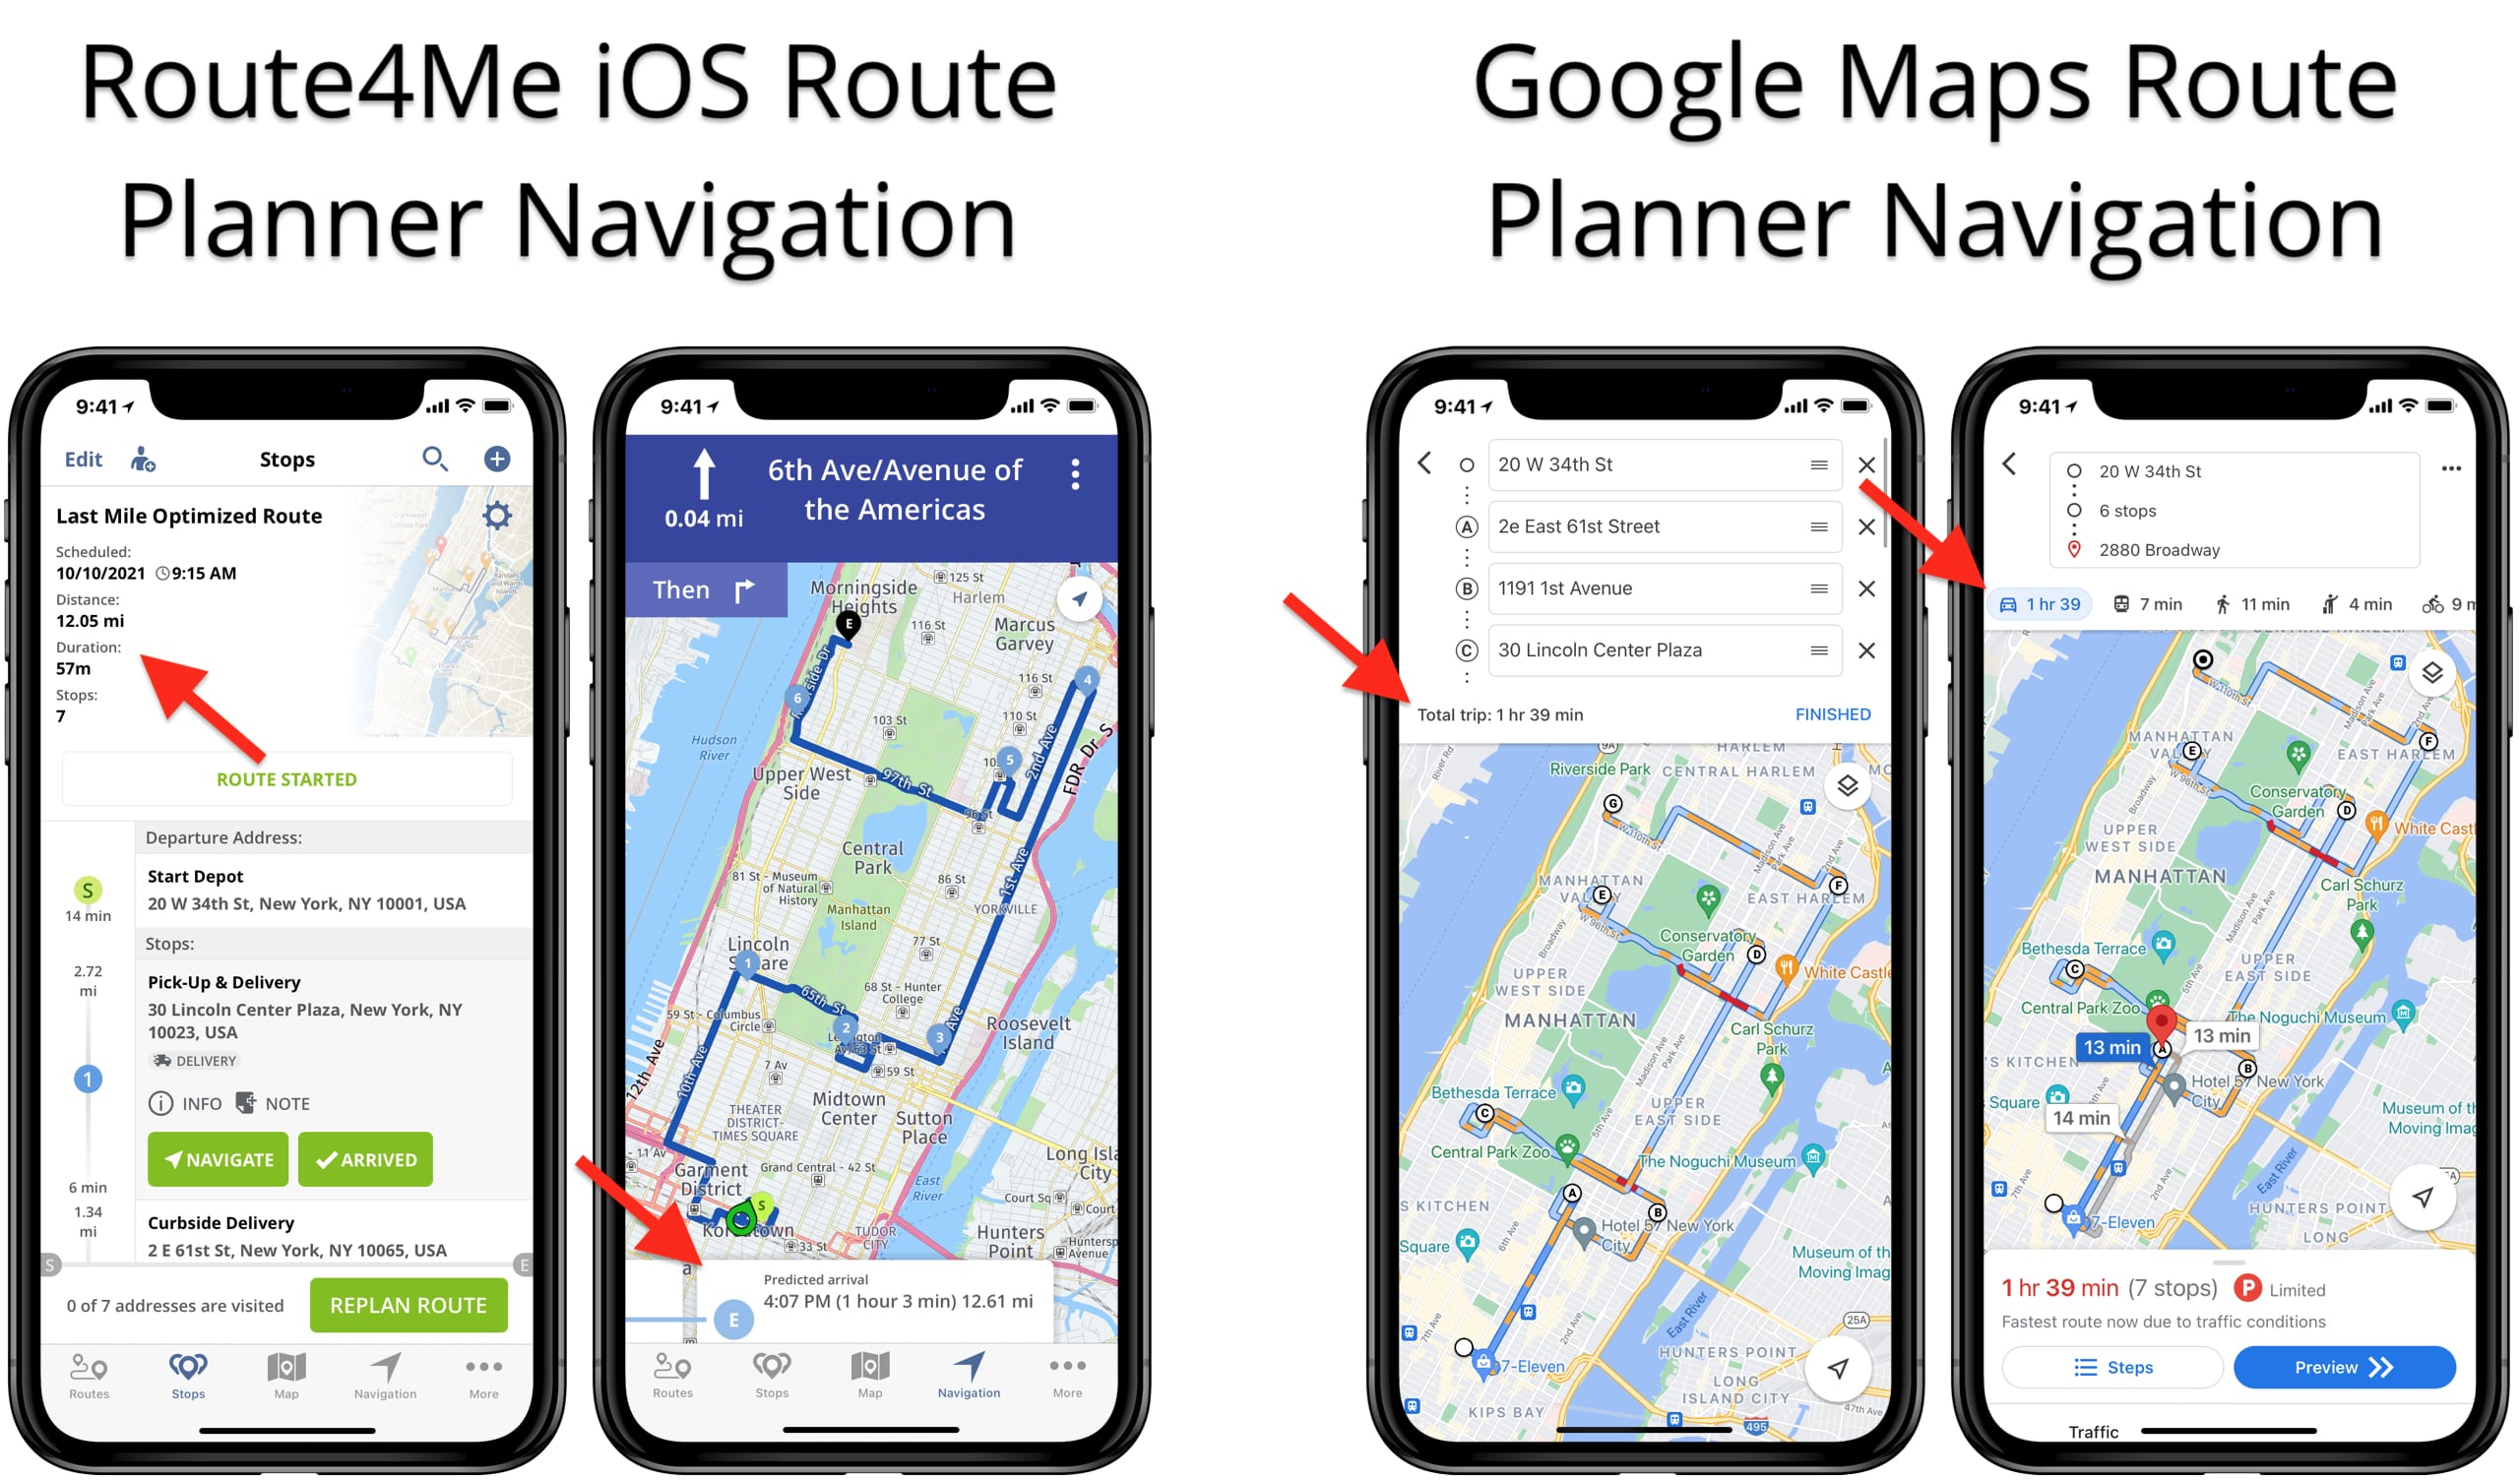 Navigating routes with the Google Maps route planner navigation and Route4Me's iOS routing app.